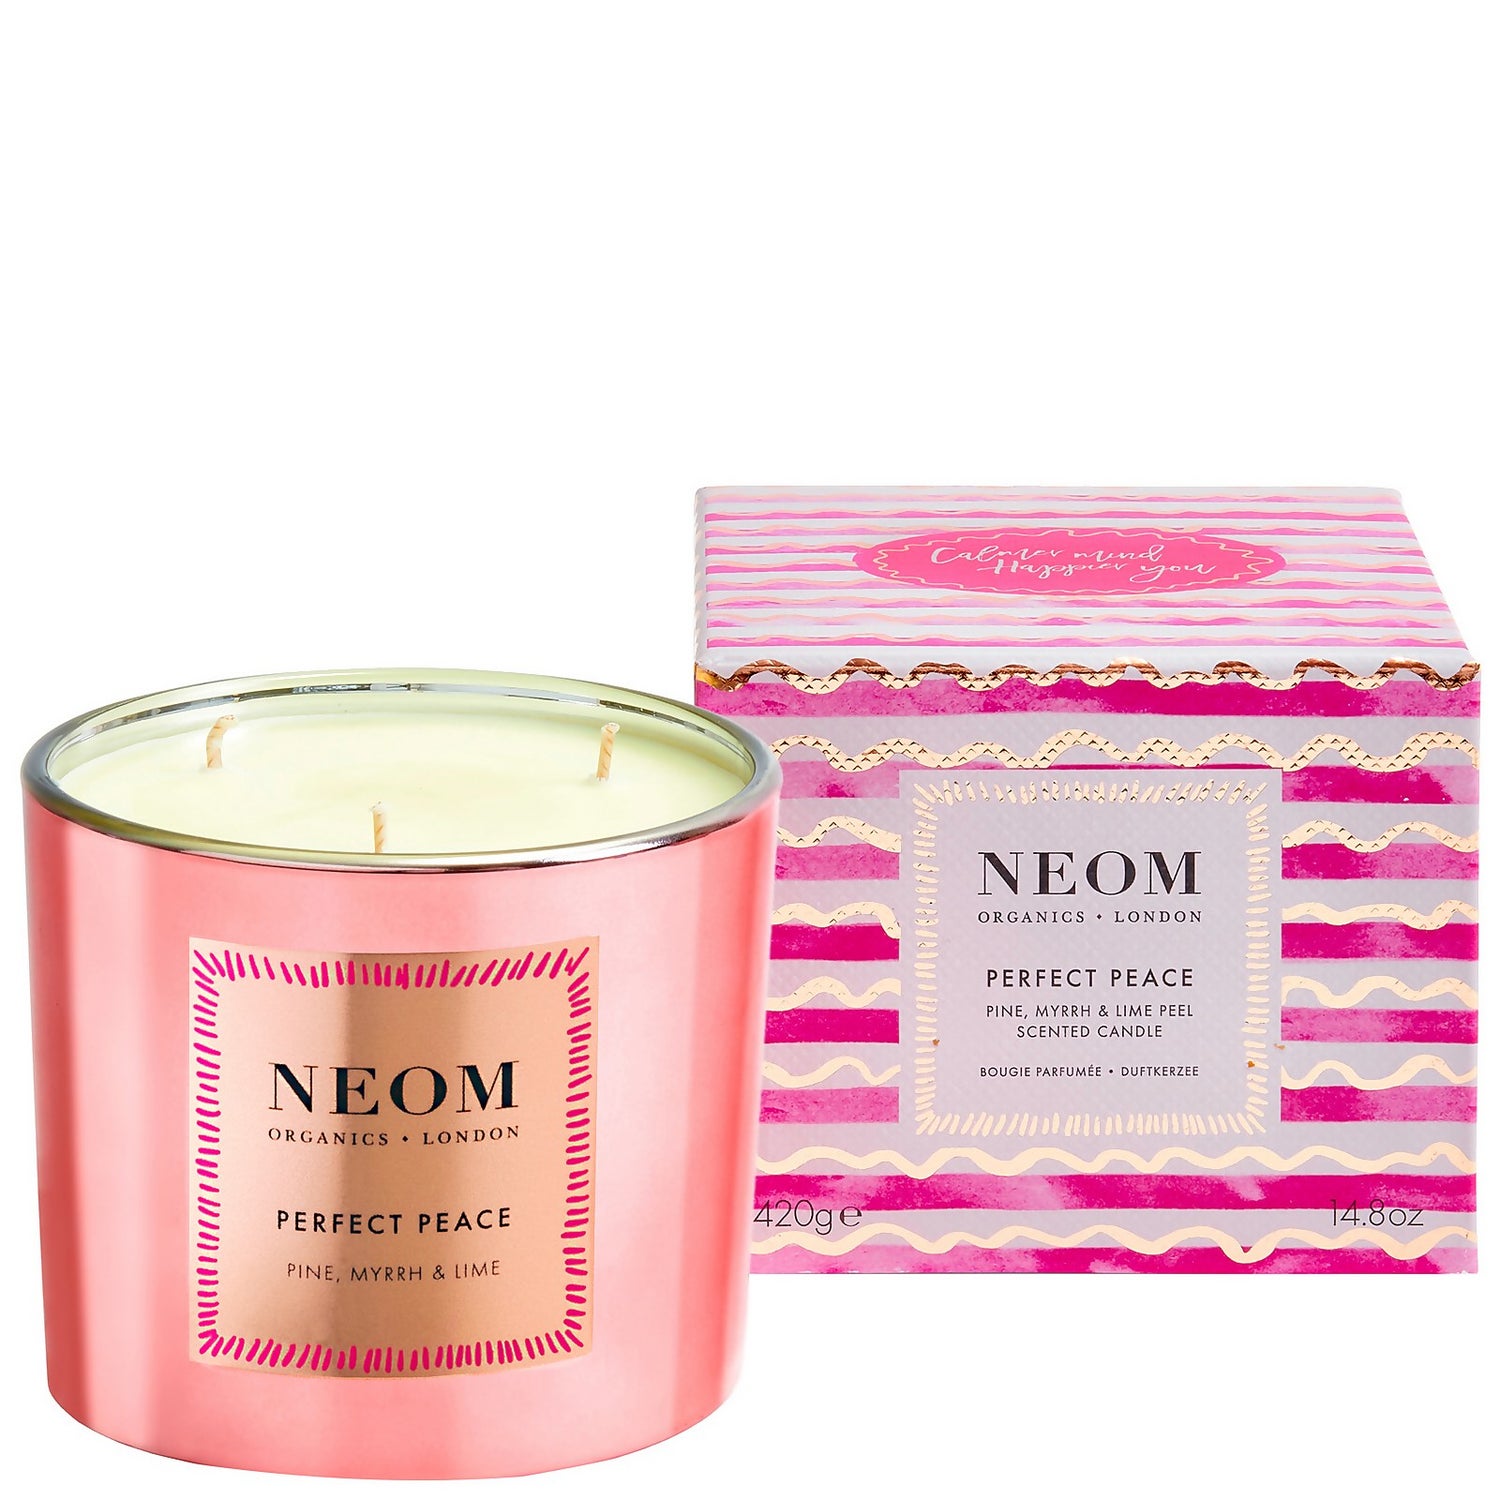 London　(3　To　Candle　allbeauty　Scent　420g　Happy　You　Make　Perfect　Neom　Wicks)　Organics　Peace